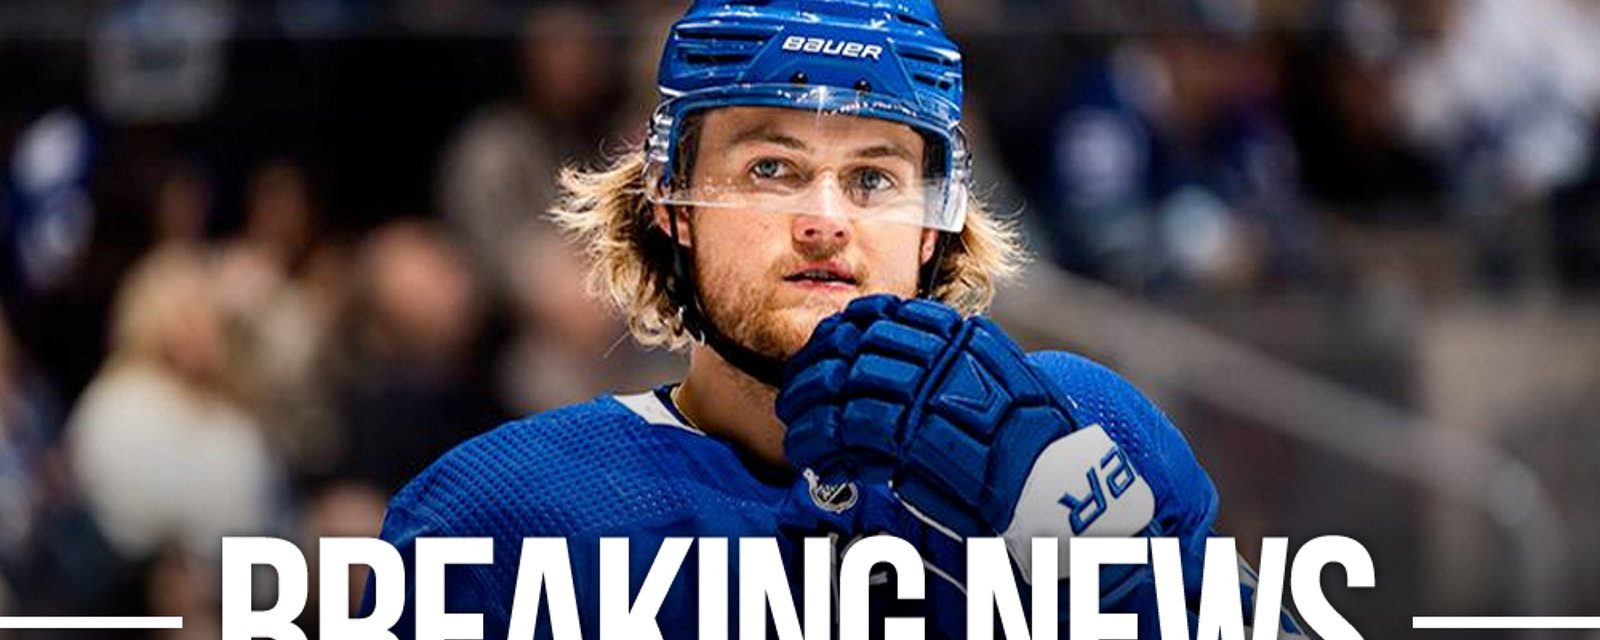 William Nylander reprimanded by the Leafs after showing up late for a team meeting